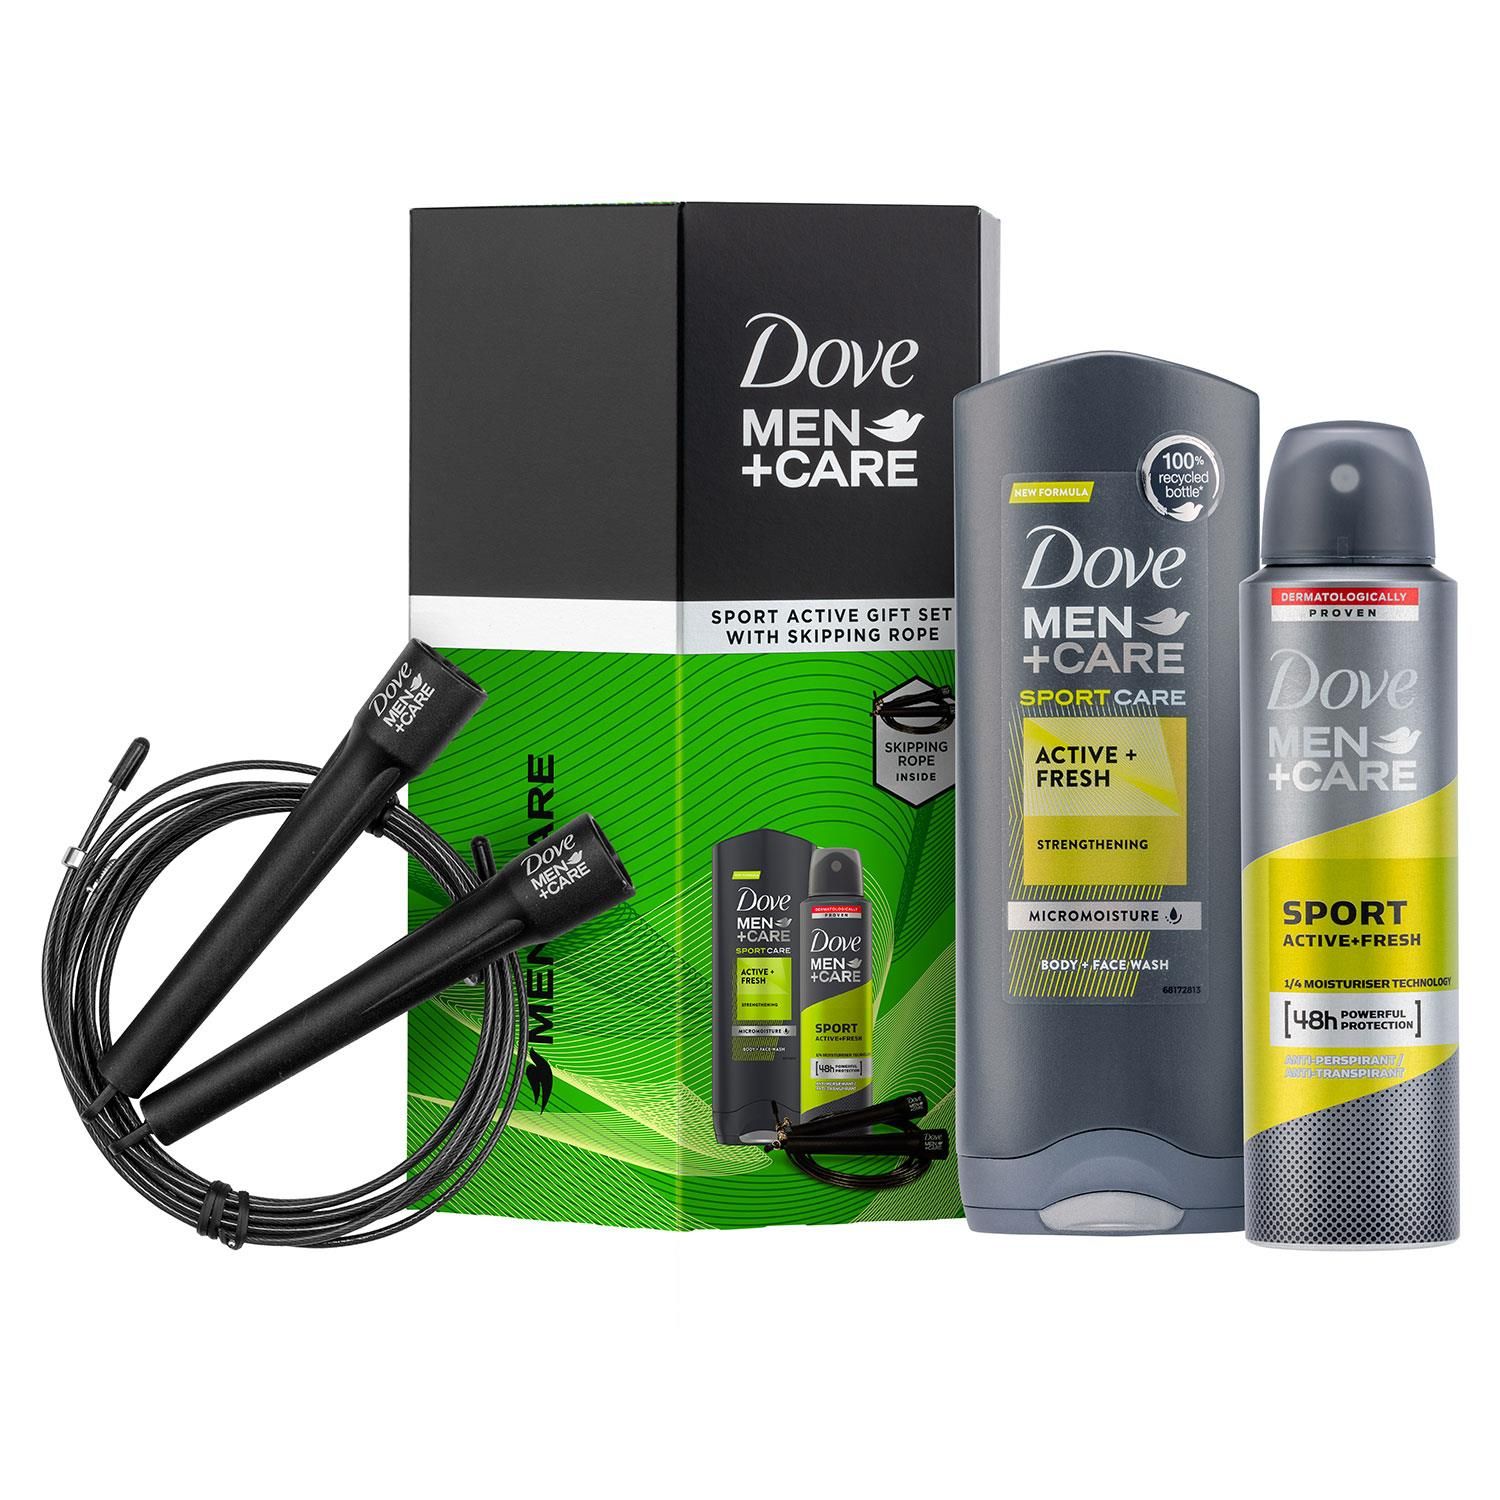 Give him the gift of care with this daily care trio gift set this Christmas. The products are designed specifically for men’s skin after sports. It’s the perfect gift to leave him feeling clean and refreshed. Dove Men + Care celebrates a new definition of strength: one with care at its centre. This gift set was designed with three Dove Men+Care products with Skipping rope to keep his skin feeling fresh and hydrated all day long. Working out is good for your mind and body. 

The best men’s body washes not only leaves you feeling refreshed, but also gives you total skin hydration. All Dove Men+Care Body Wash 250ml for men contain Micromoisture which activates on the skin and helps fight the drying out of the skin after showering. Powering out really during sports is good for the body and mind. But did you know that sports can also irritate your skin  Sweat, the friction generated by movements, frequent showering and even drying with the towel stress your skin and can lead to dry skin feeling, irritation and irritation. The Dove Men+Care Deodorant Spray 150 ml Sport Active Fresh + Antiperspirant is specially developed for the care of men's skin - even after sports.

Features:
For freshness before and after sport
Contains ¼ care cream to protect against skin irritations
Sport deodorant spray for men
Effective against sweat, gentle on the skin

Safety Warning:
Body Spray: Stop use if rash or irritation occurs. Avoid direct inhalation. Use in short bursts in well-ventilated places, avoid prolonged spraying. Do not spray near your eyes. Use only as directed. 
Body Wash: Use only as directed. Avoid contact with eyes. If eye contact occurs wash out immediately with warm water. If irritation occurs discontinue use.

Gift Set Includes:
1x Dove M+C Sports Active Body Wash 250ml
1x Dove M+C Sports Active Antiperspirant 150ml with Skipping Rope